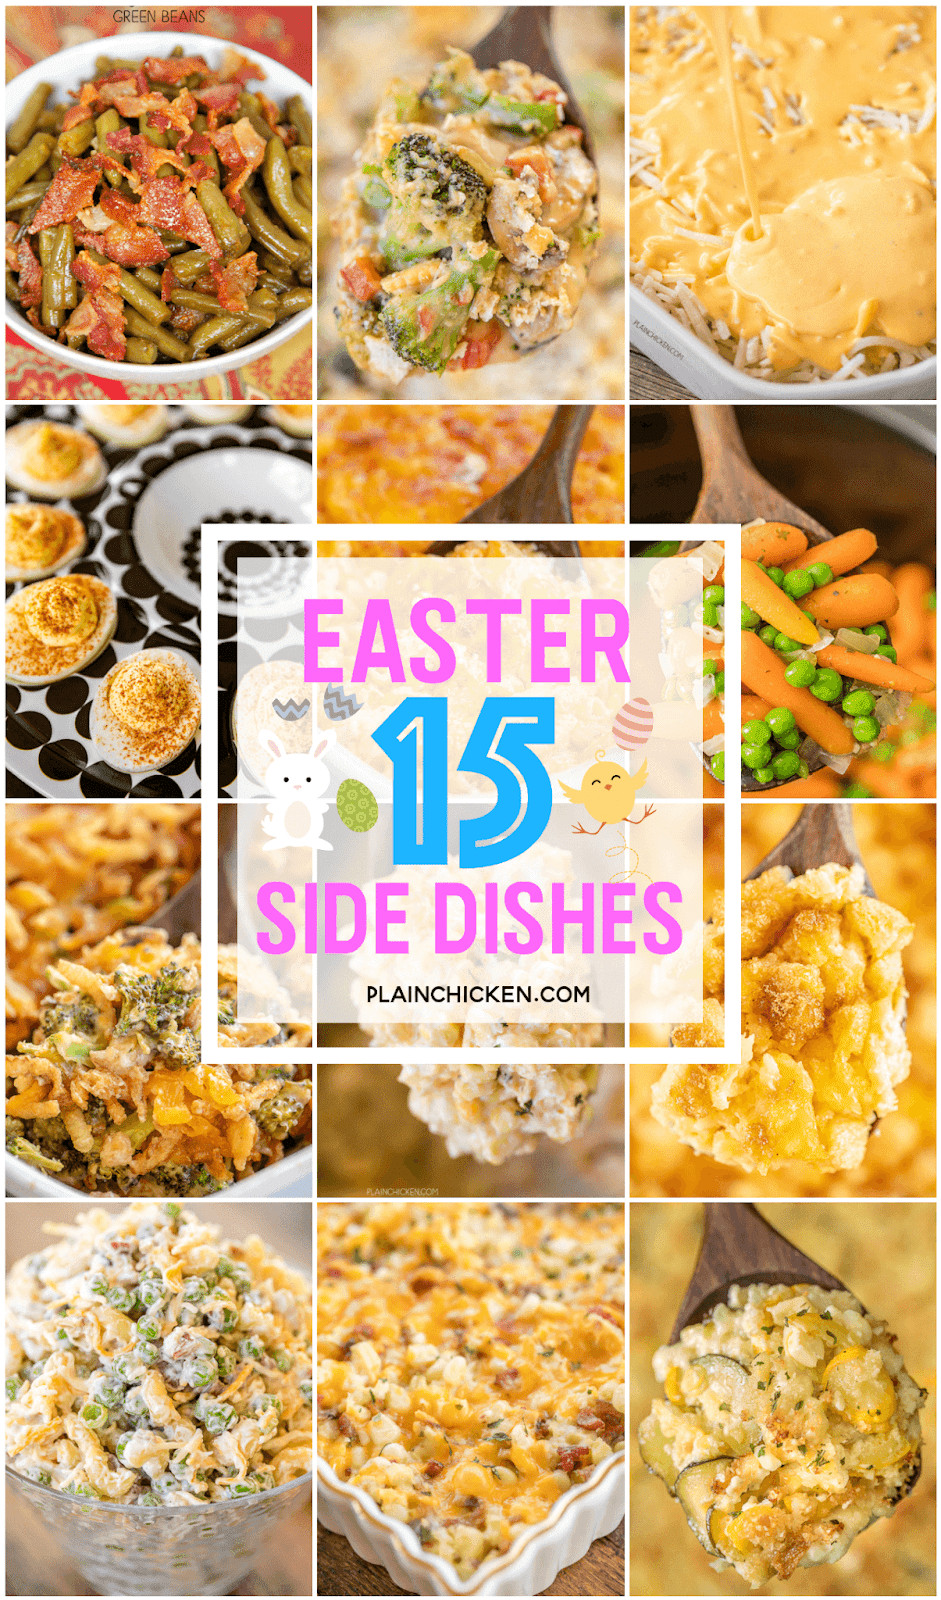 Make Ahead Easter Side Dishes
 Top 15 Side Dishes for Easter Dinner